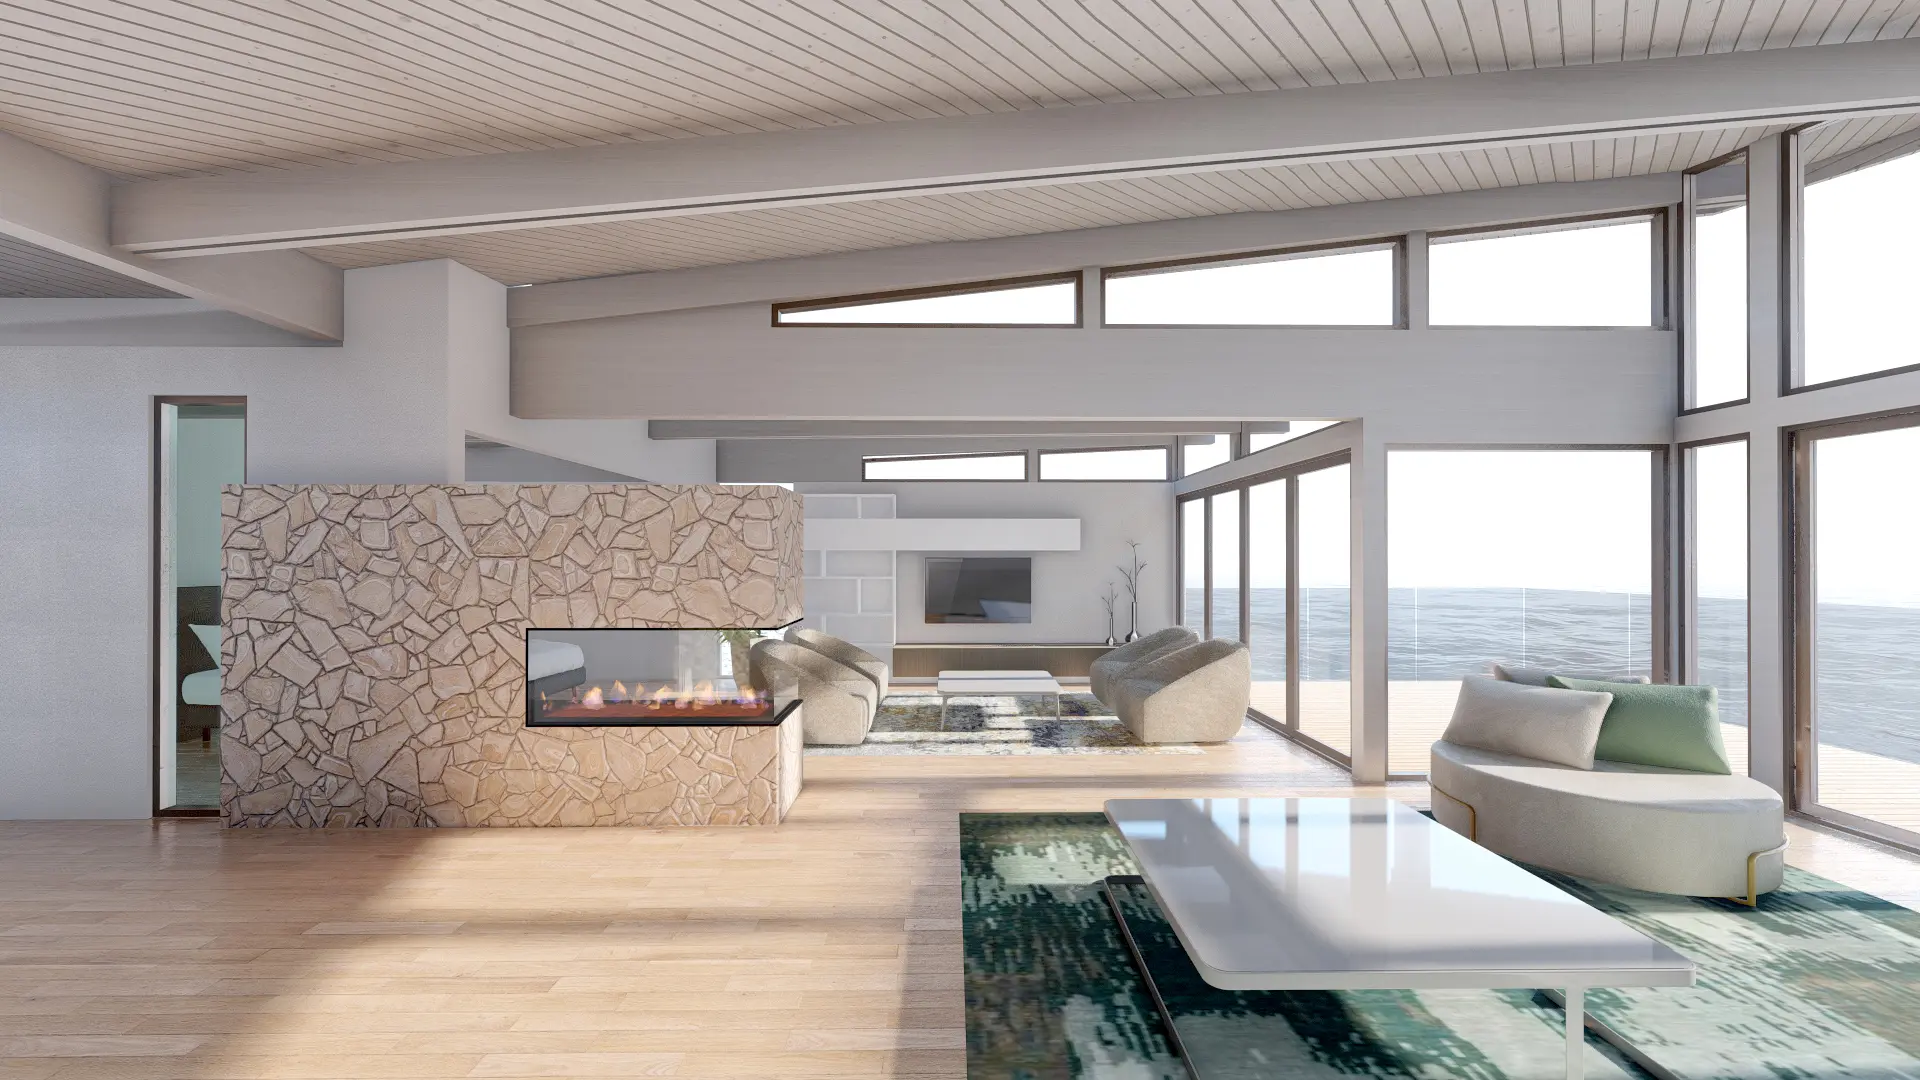 paolo-volpis-architects-malibu-ocean-front-remodel-mid-century-modern-california-white-glass-open-space-bungalow-post-beam-with-case-study-house-poliform-10.webp